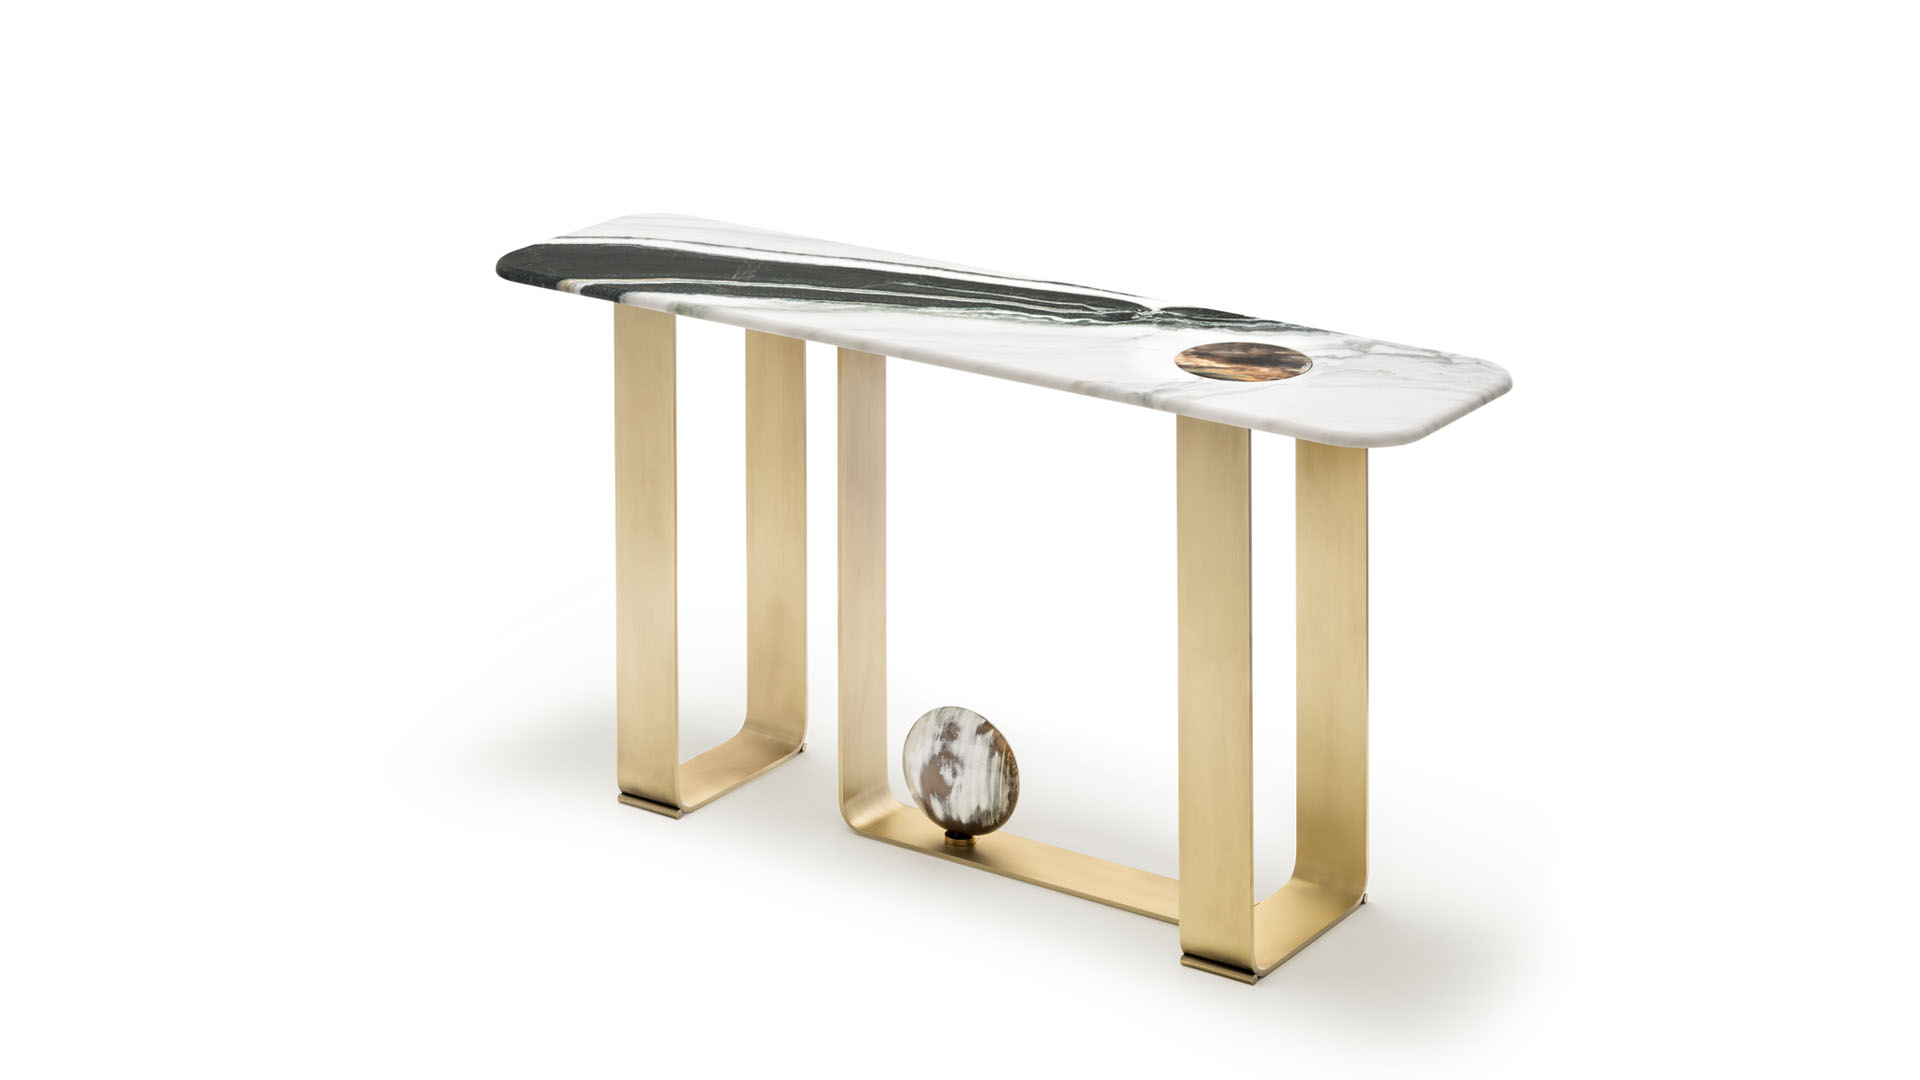 Tables and Console tables - Minerva console table in Dalmata marble and horn 7005S - cover - Arcahorn